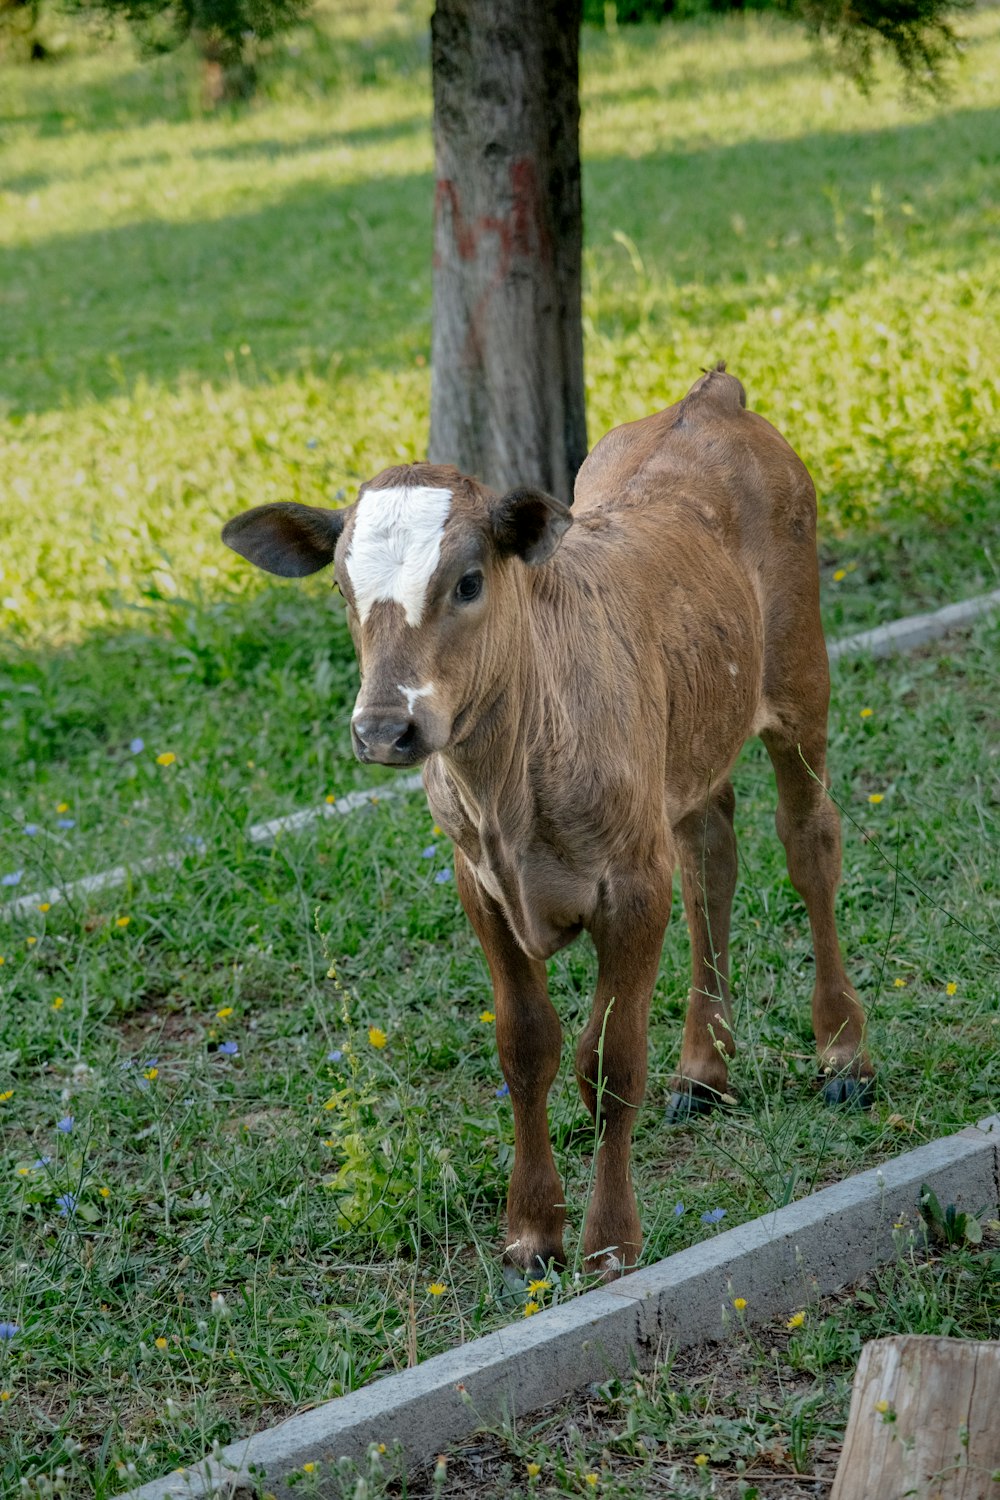 a baby cow standing in the grass near a tree